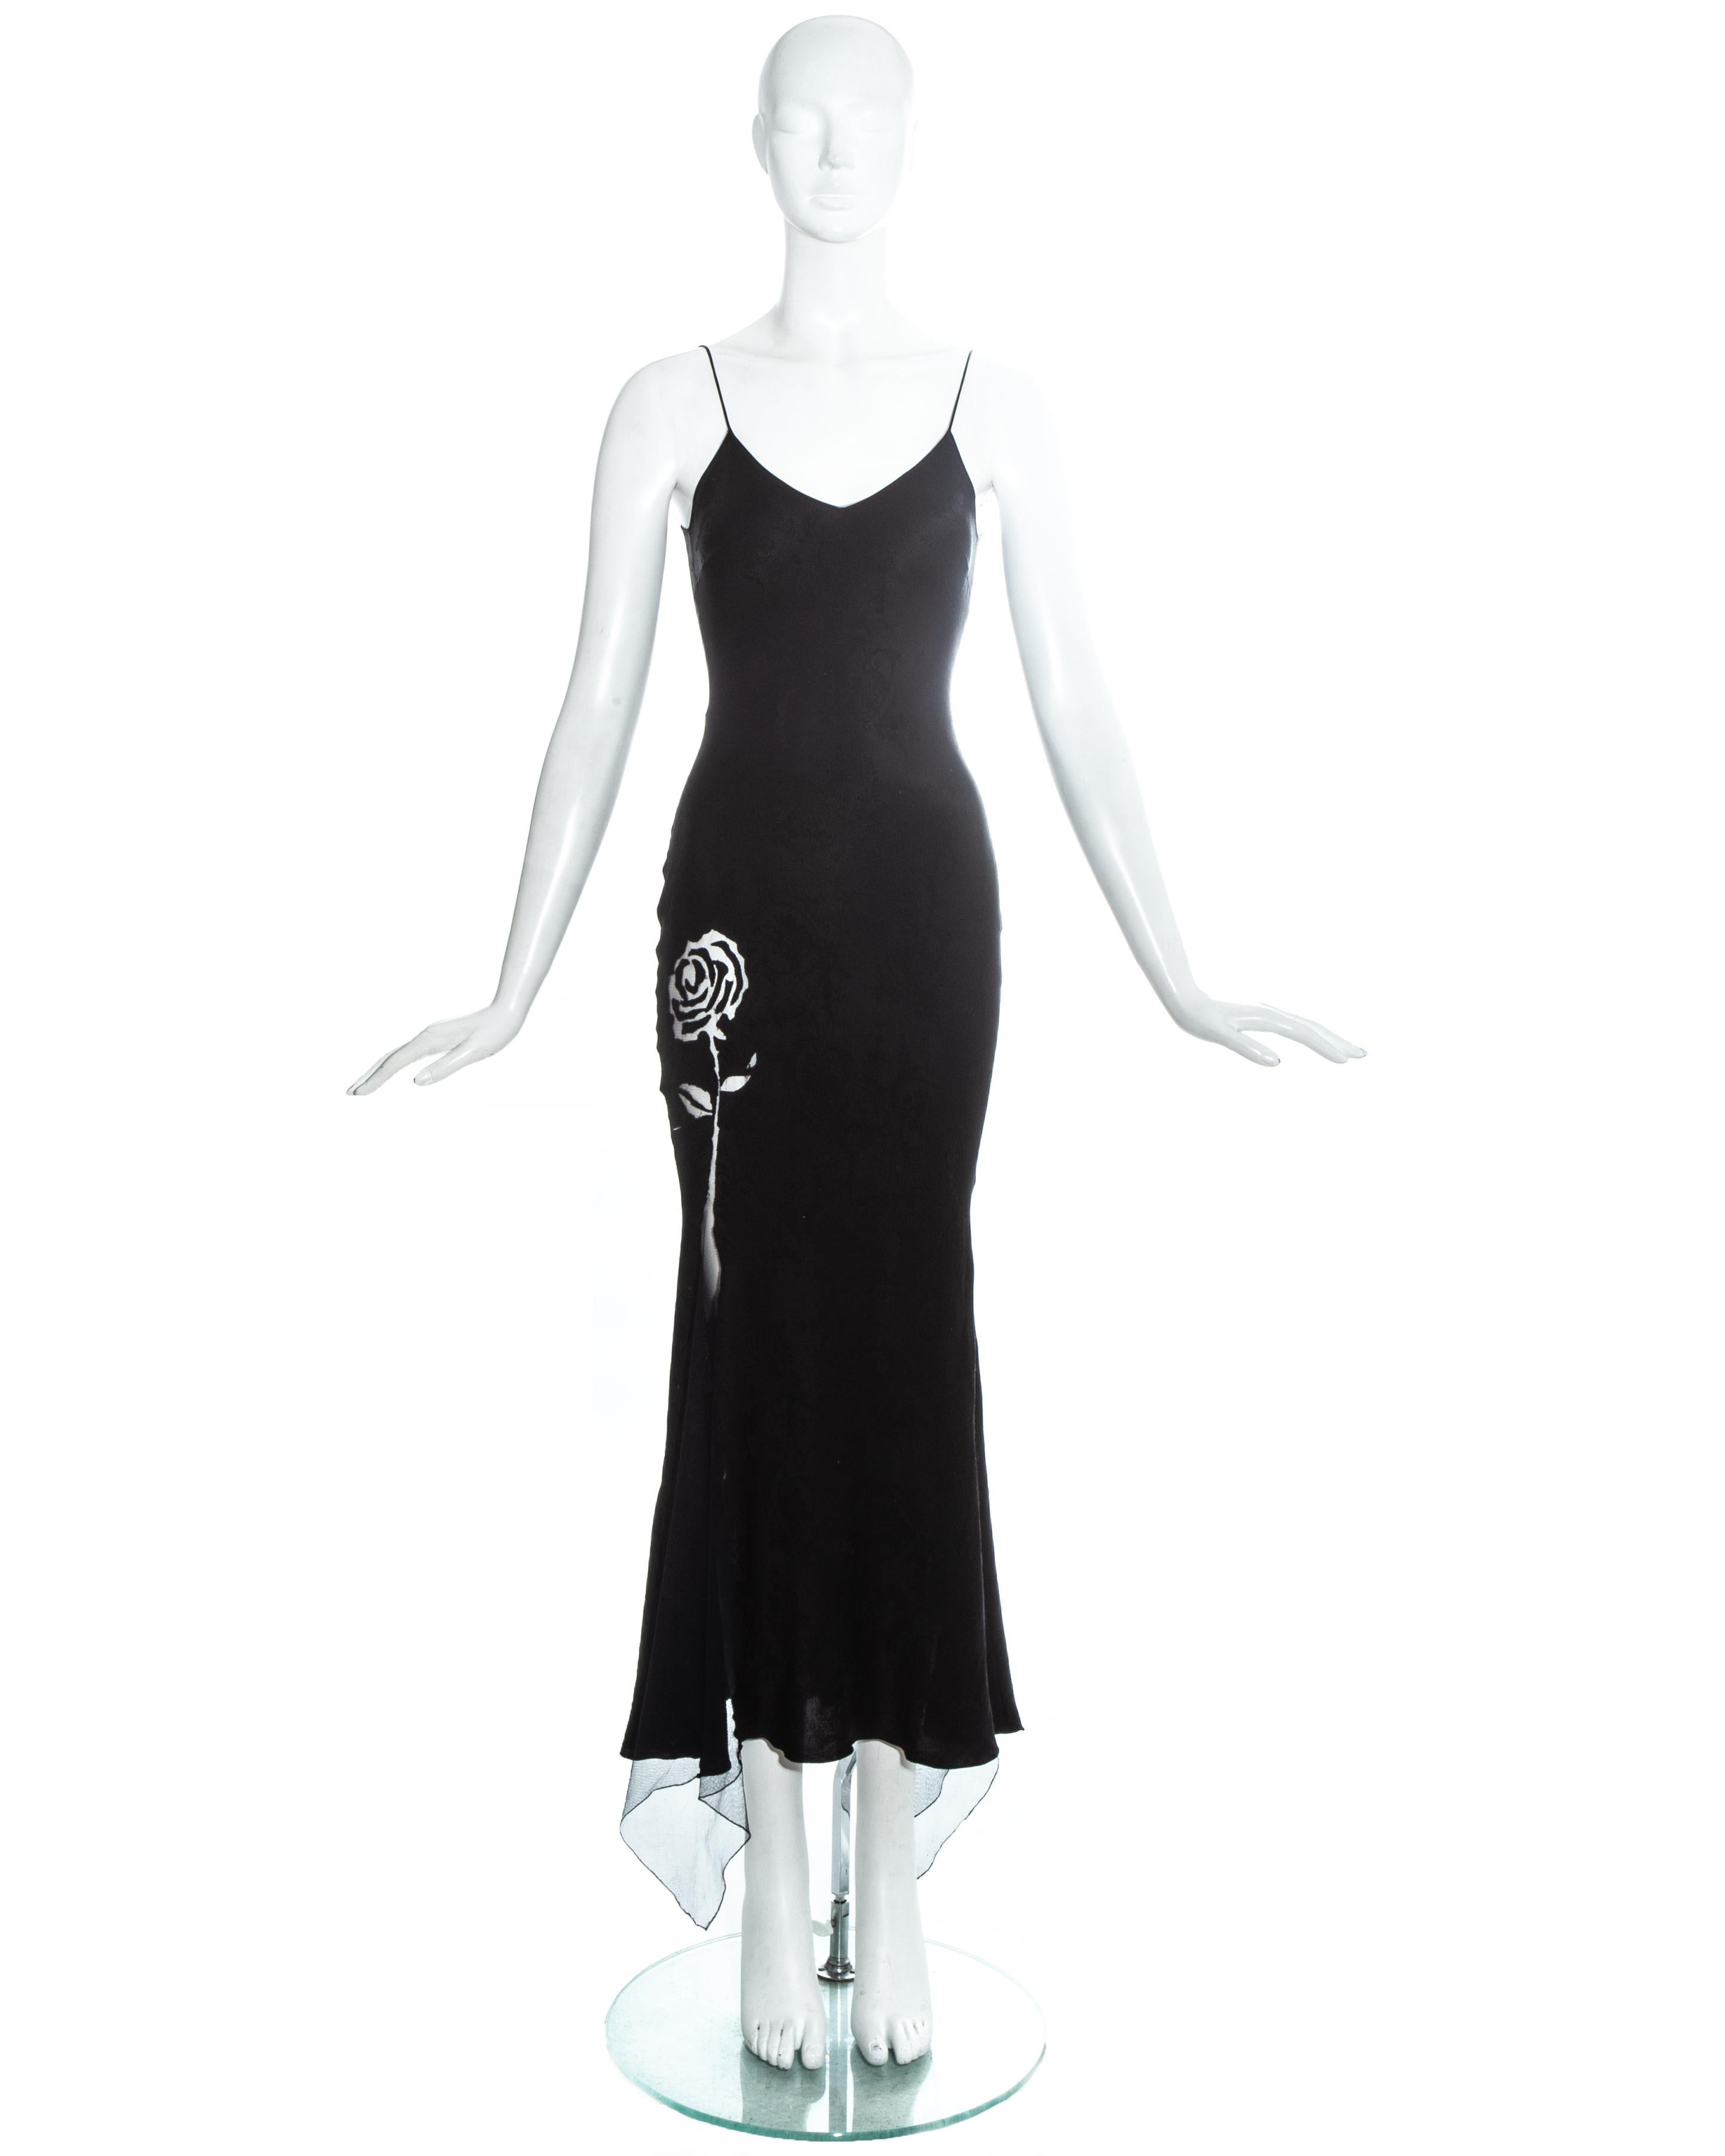 John Galliano black silk jacquard evening dress with floral mesh insets.

Spring-Summer 1998